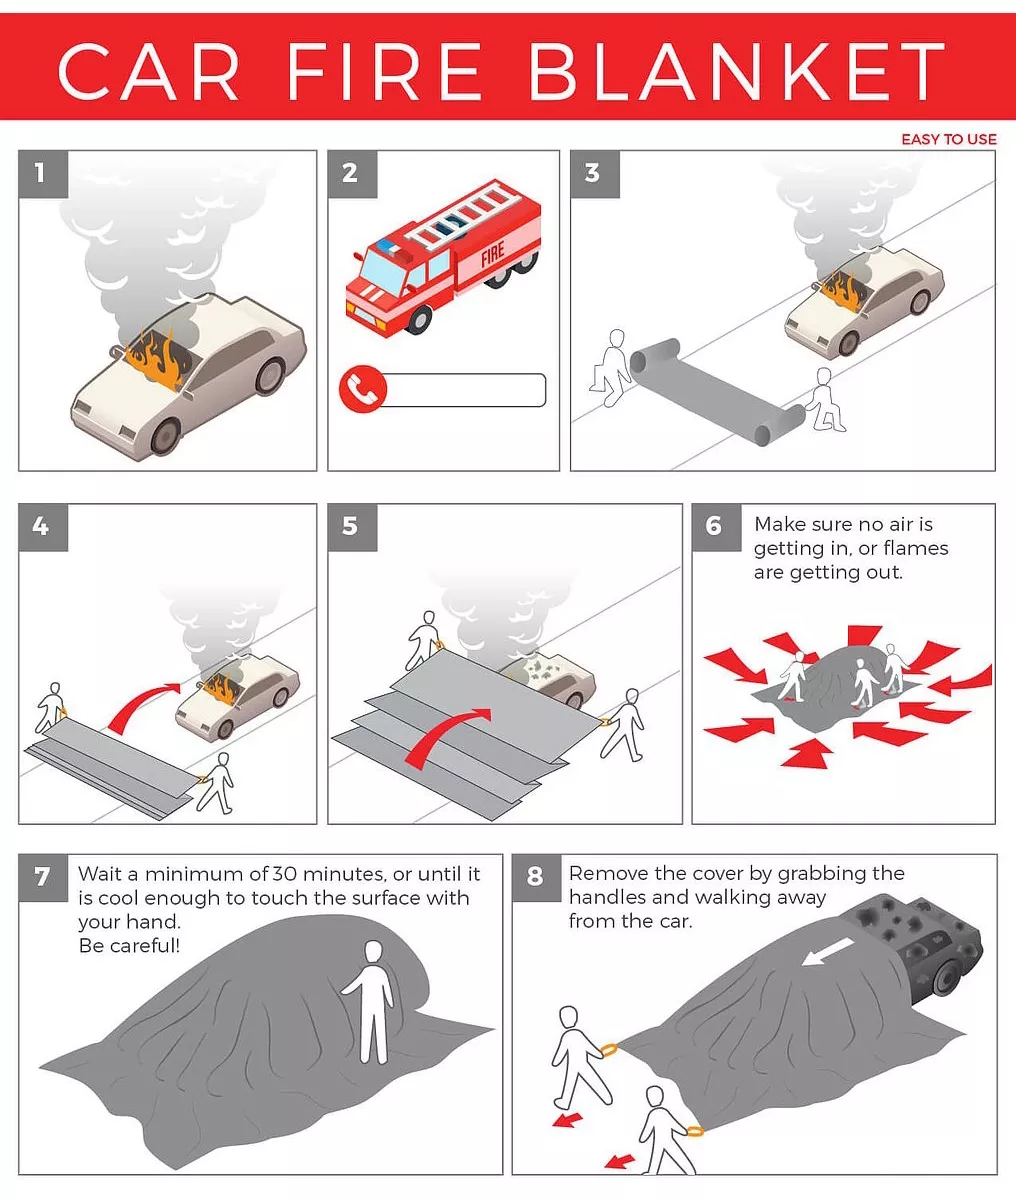 What is the application of the Extreme Large Car Fire Blanket For Vehicles